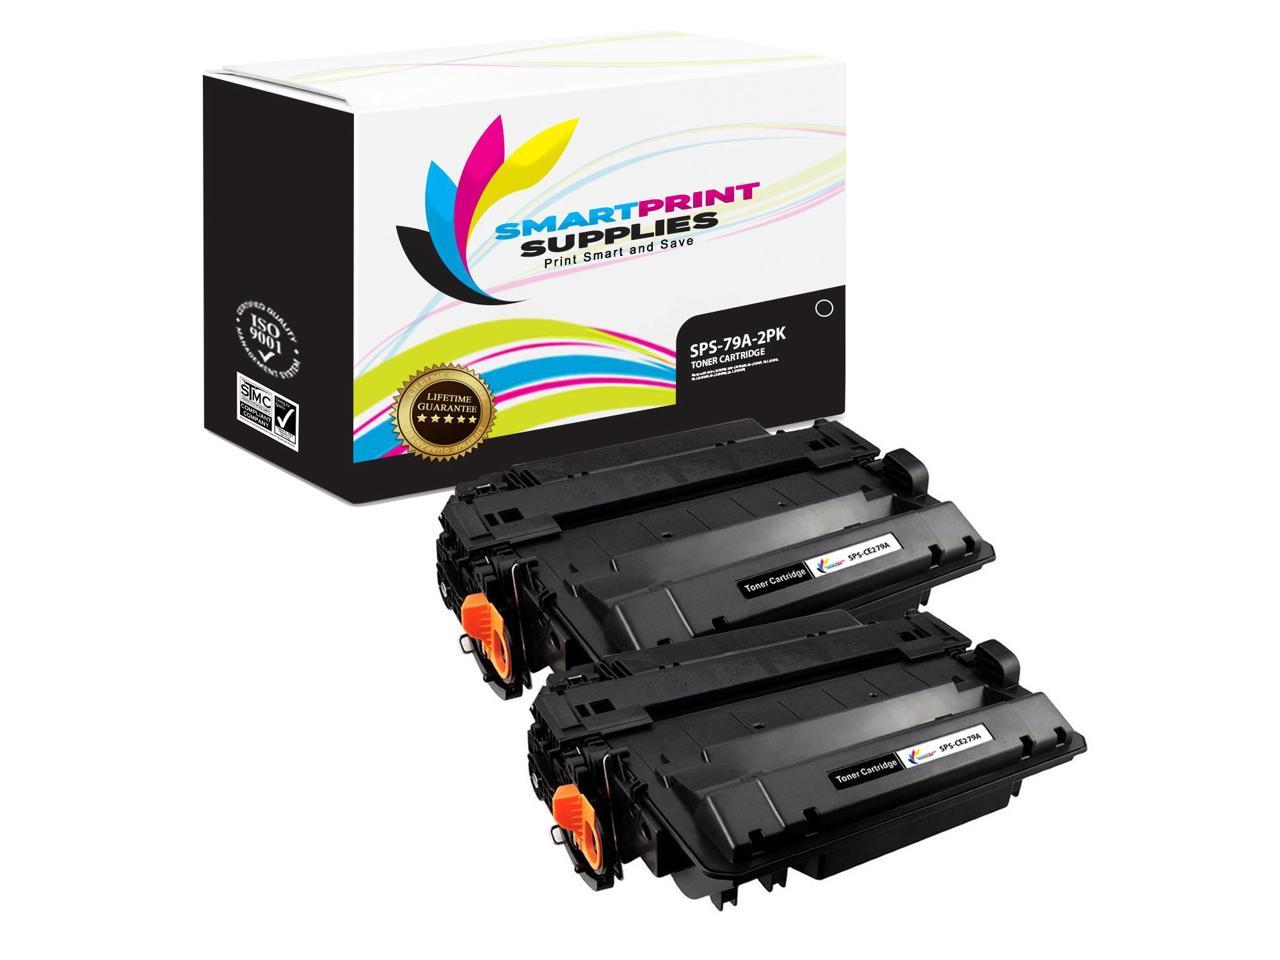 Smart Print Supplies Compatible 79a Cf279a Black Toner Cartridge Replacement For Hp Laserjet Pro M12a M12w Mfp M26a M26nw Printers 1 000 Pages 2 Pack Newegg Com